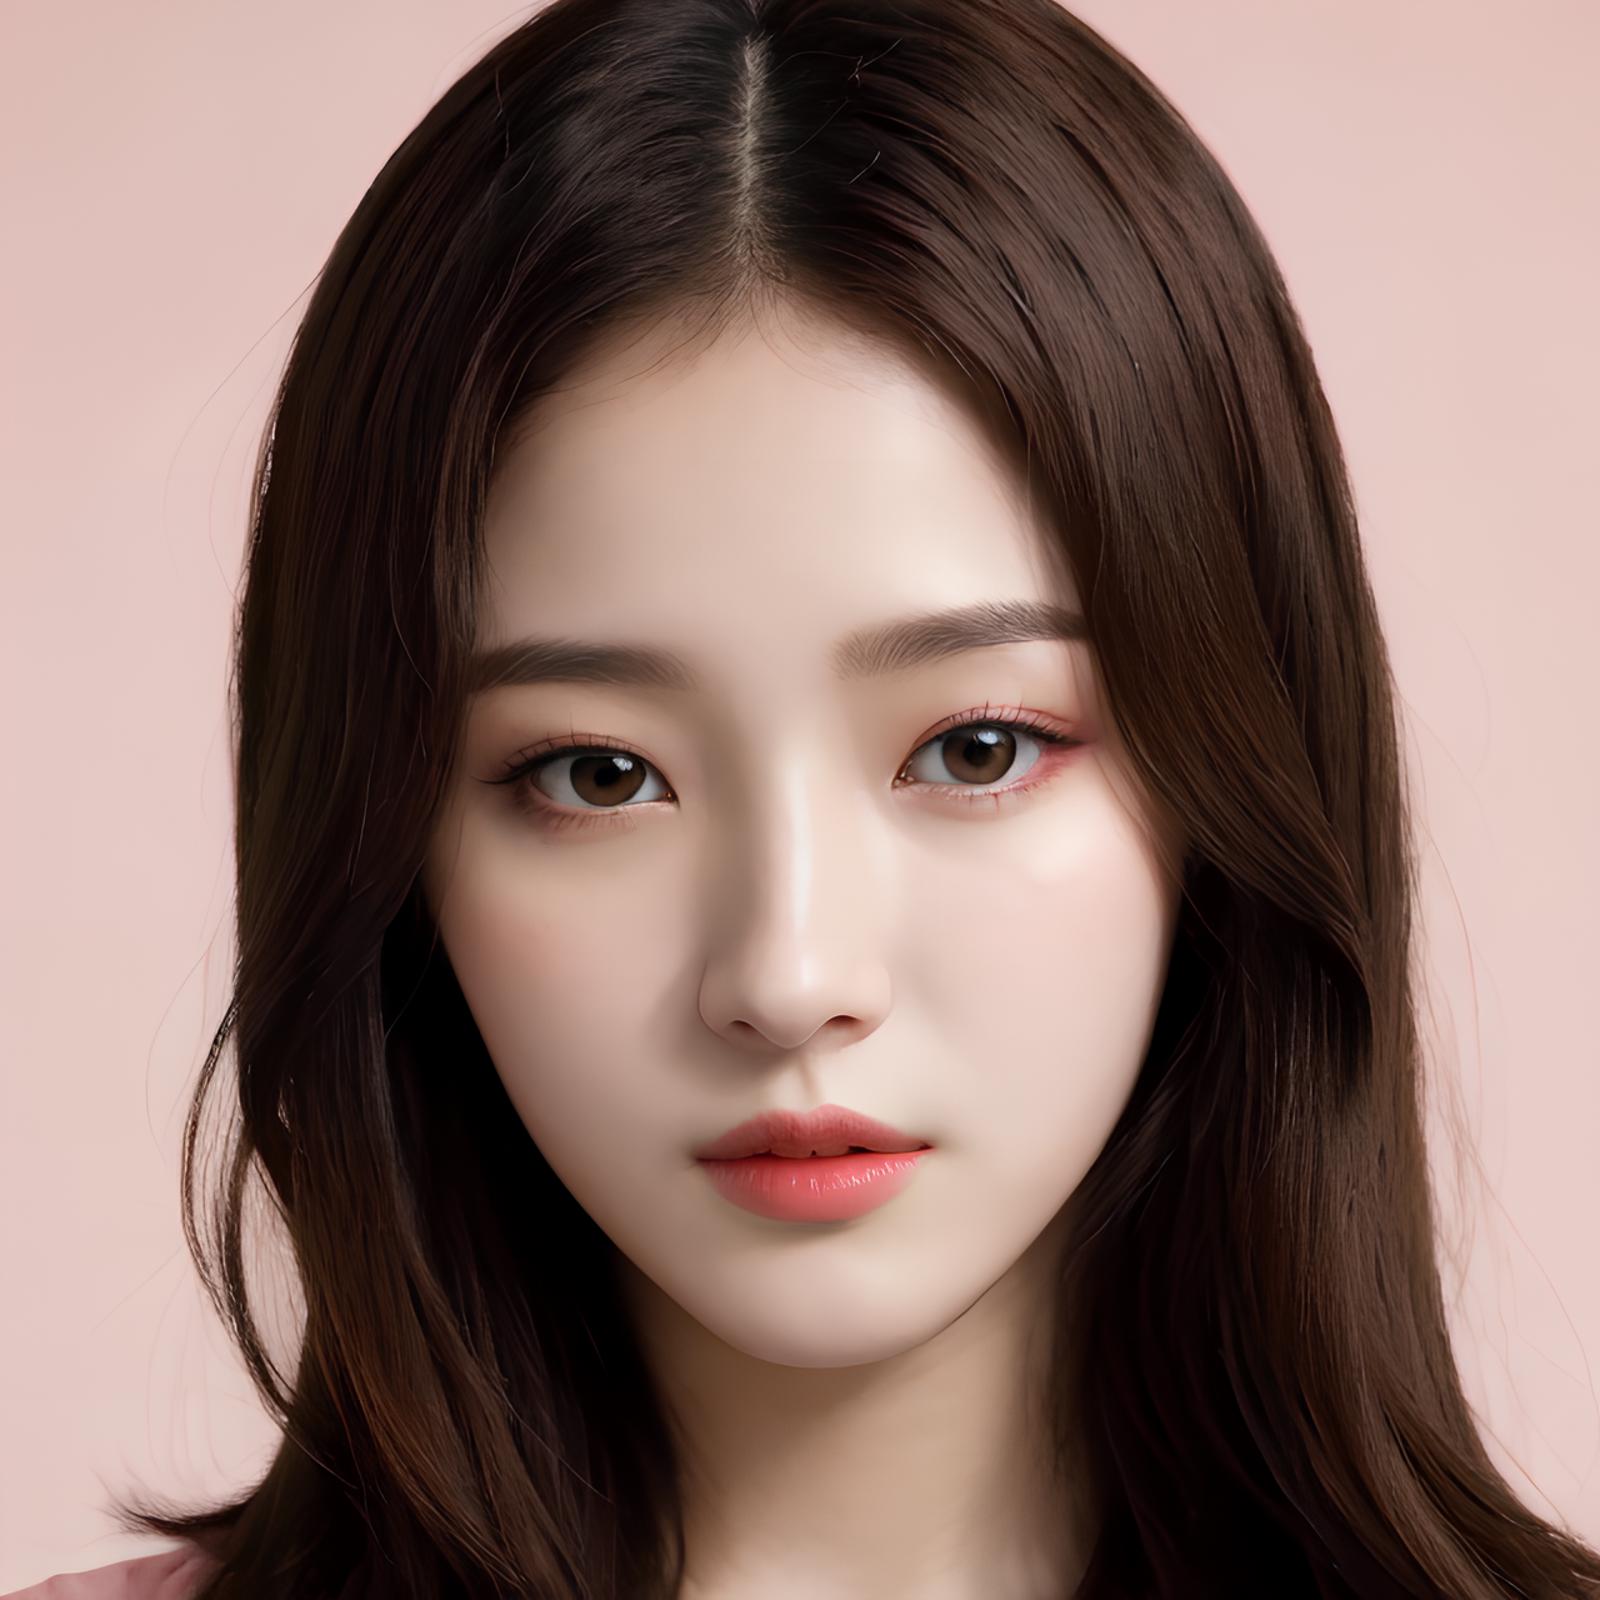 Not Momoland - Nancy image by Tissue_AI